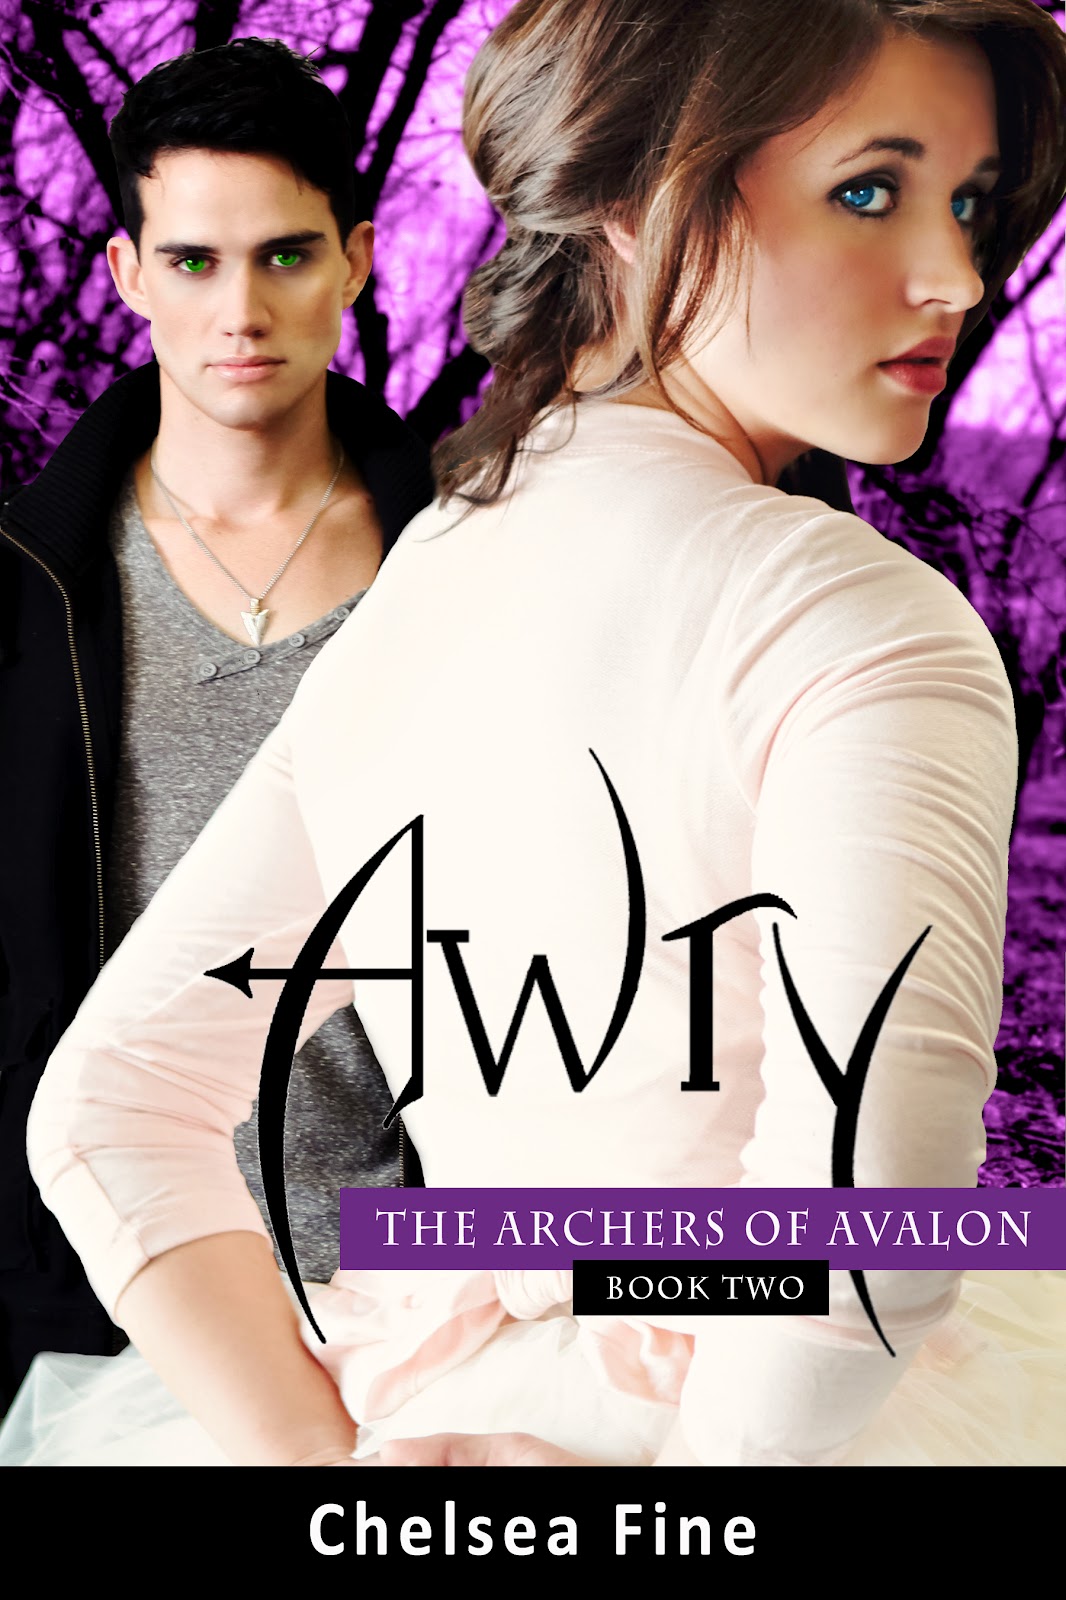 Awry (Archers of Avalon, Book Two) Chelsea Fine